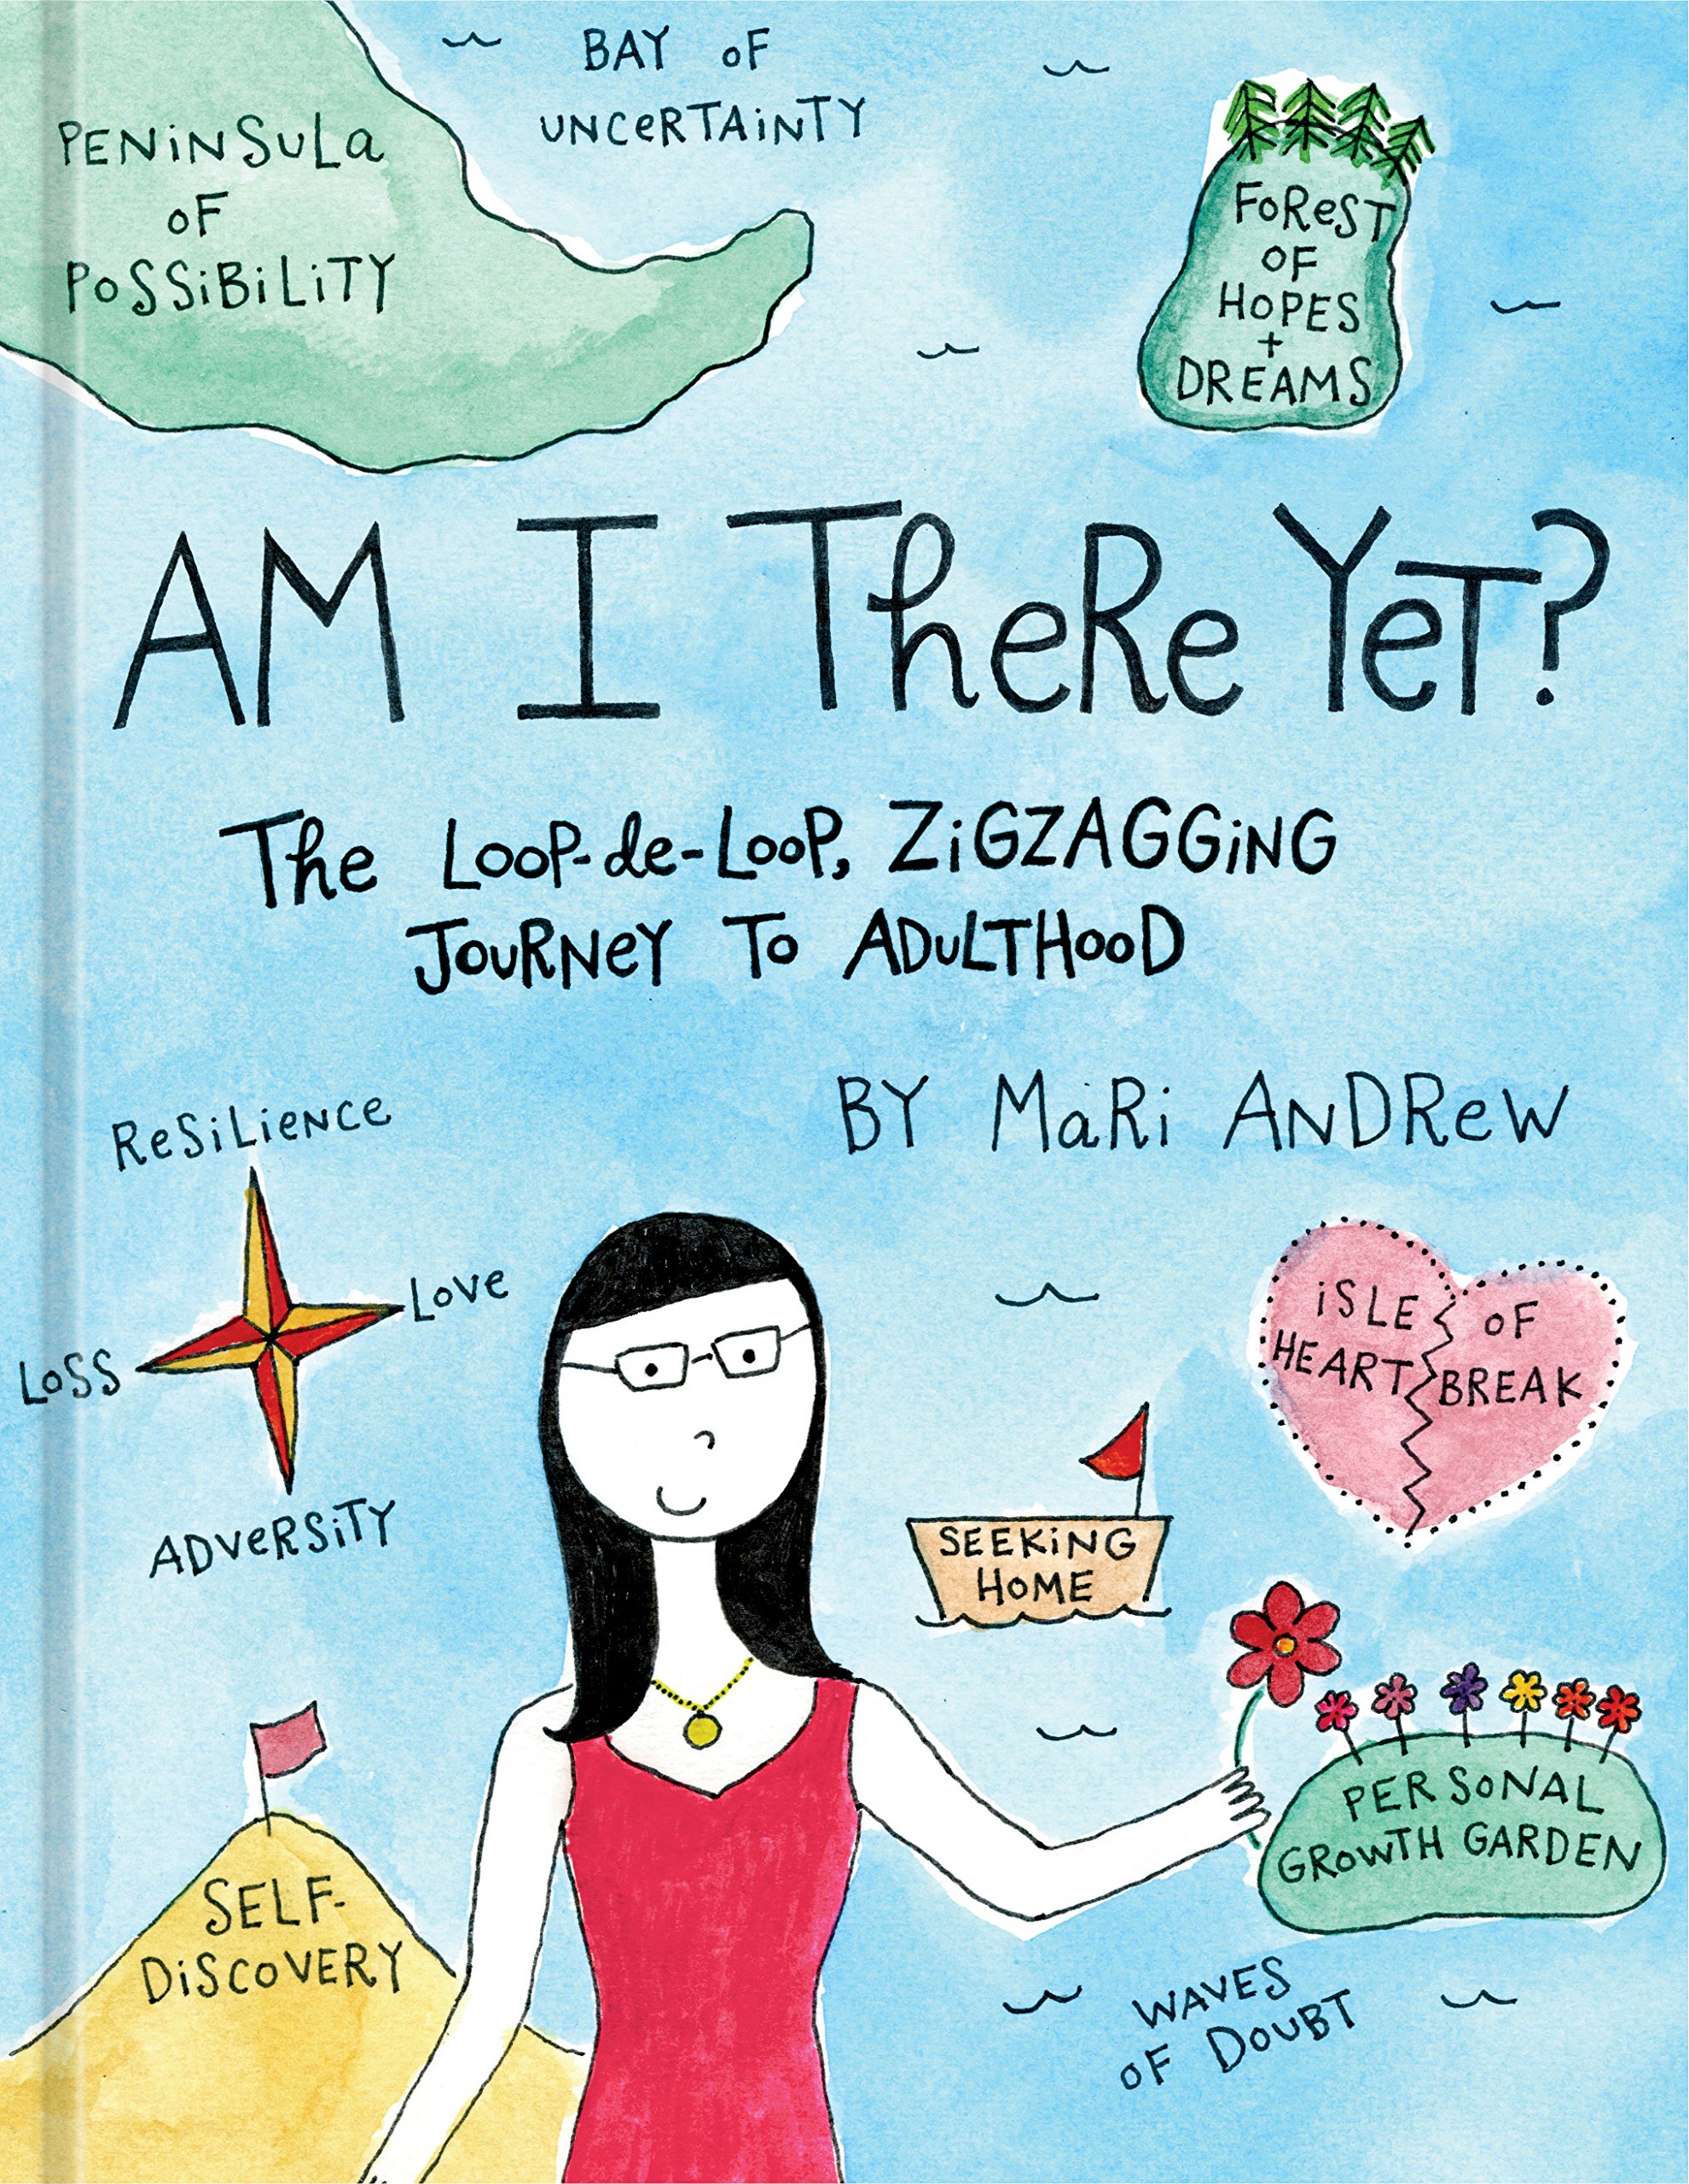 Book Review: “Am I There Yet?: The Loop-de-Loop, Zigzagging Journey to Adulthood” by Mari Andrew